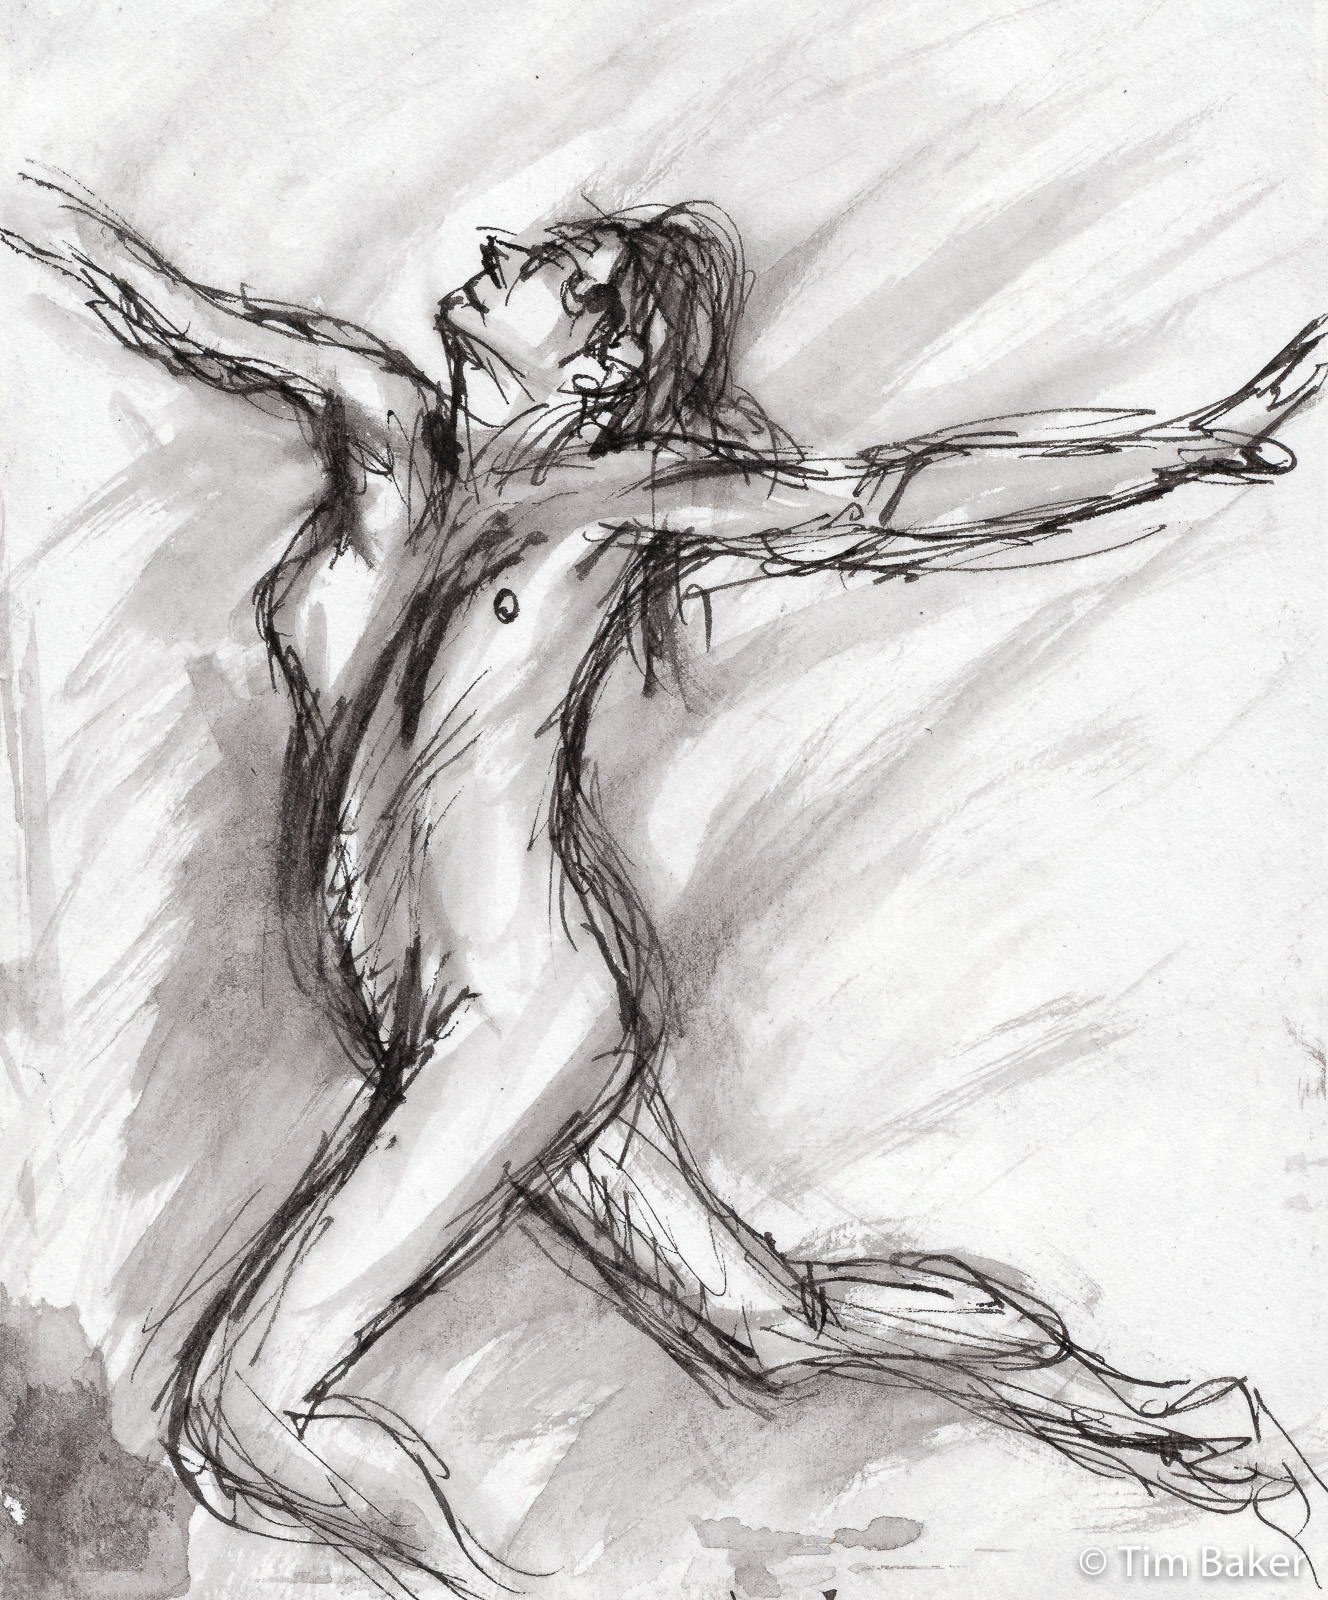 Leap, Online Life Drawing #3, Dip pen and Hero 234 ink and brush, A5 sketchpad